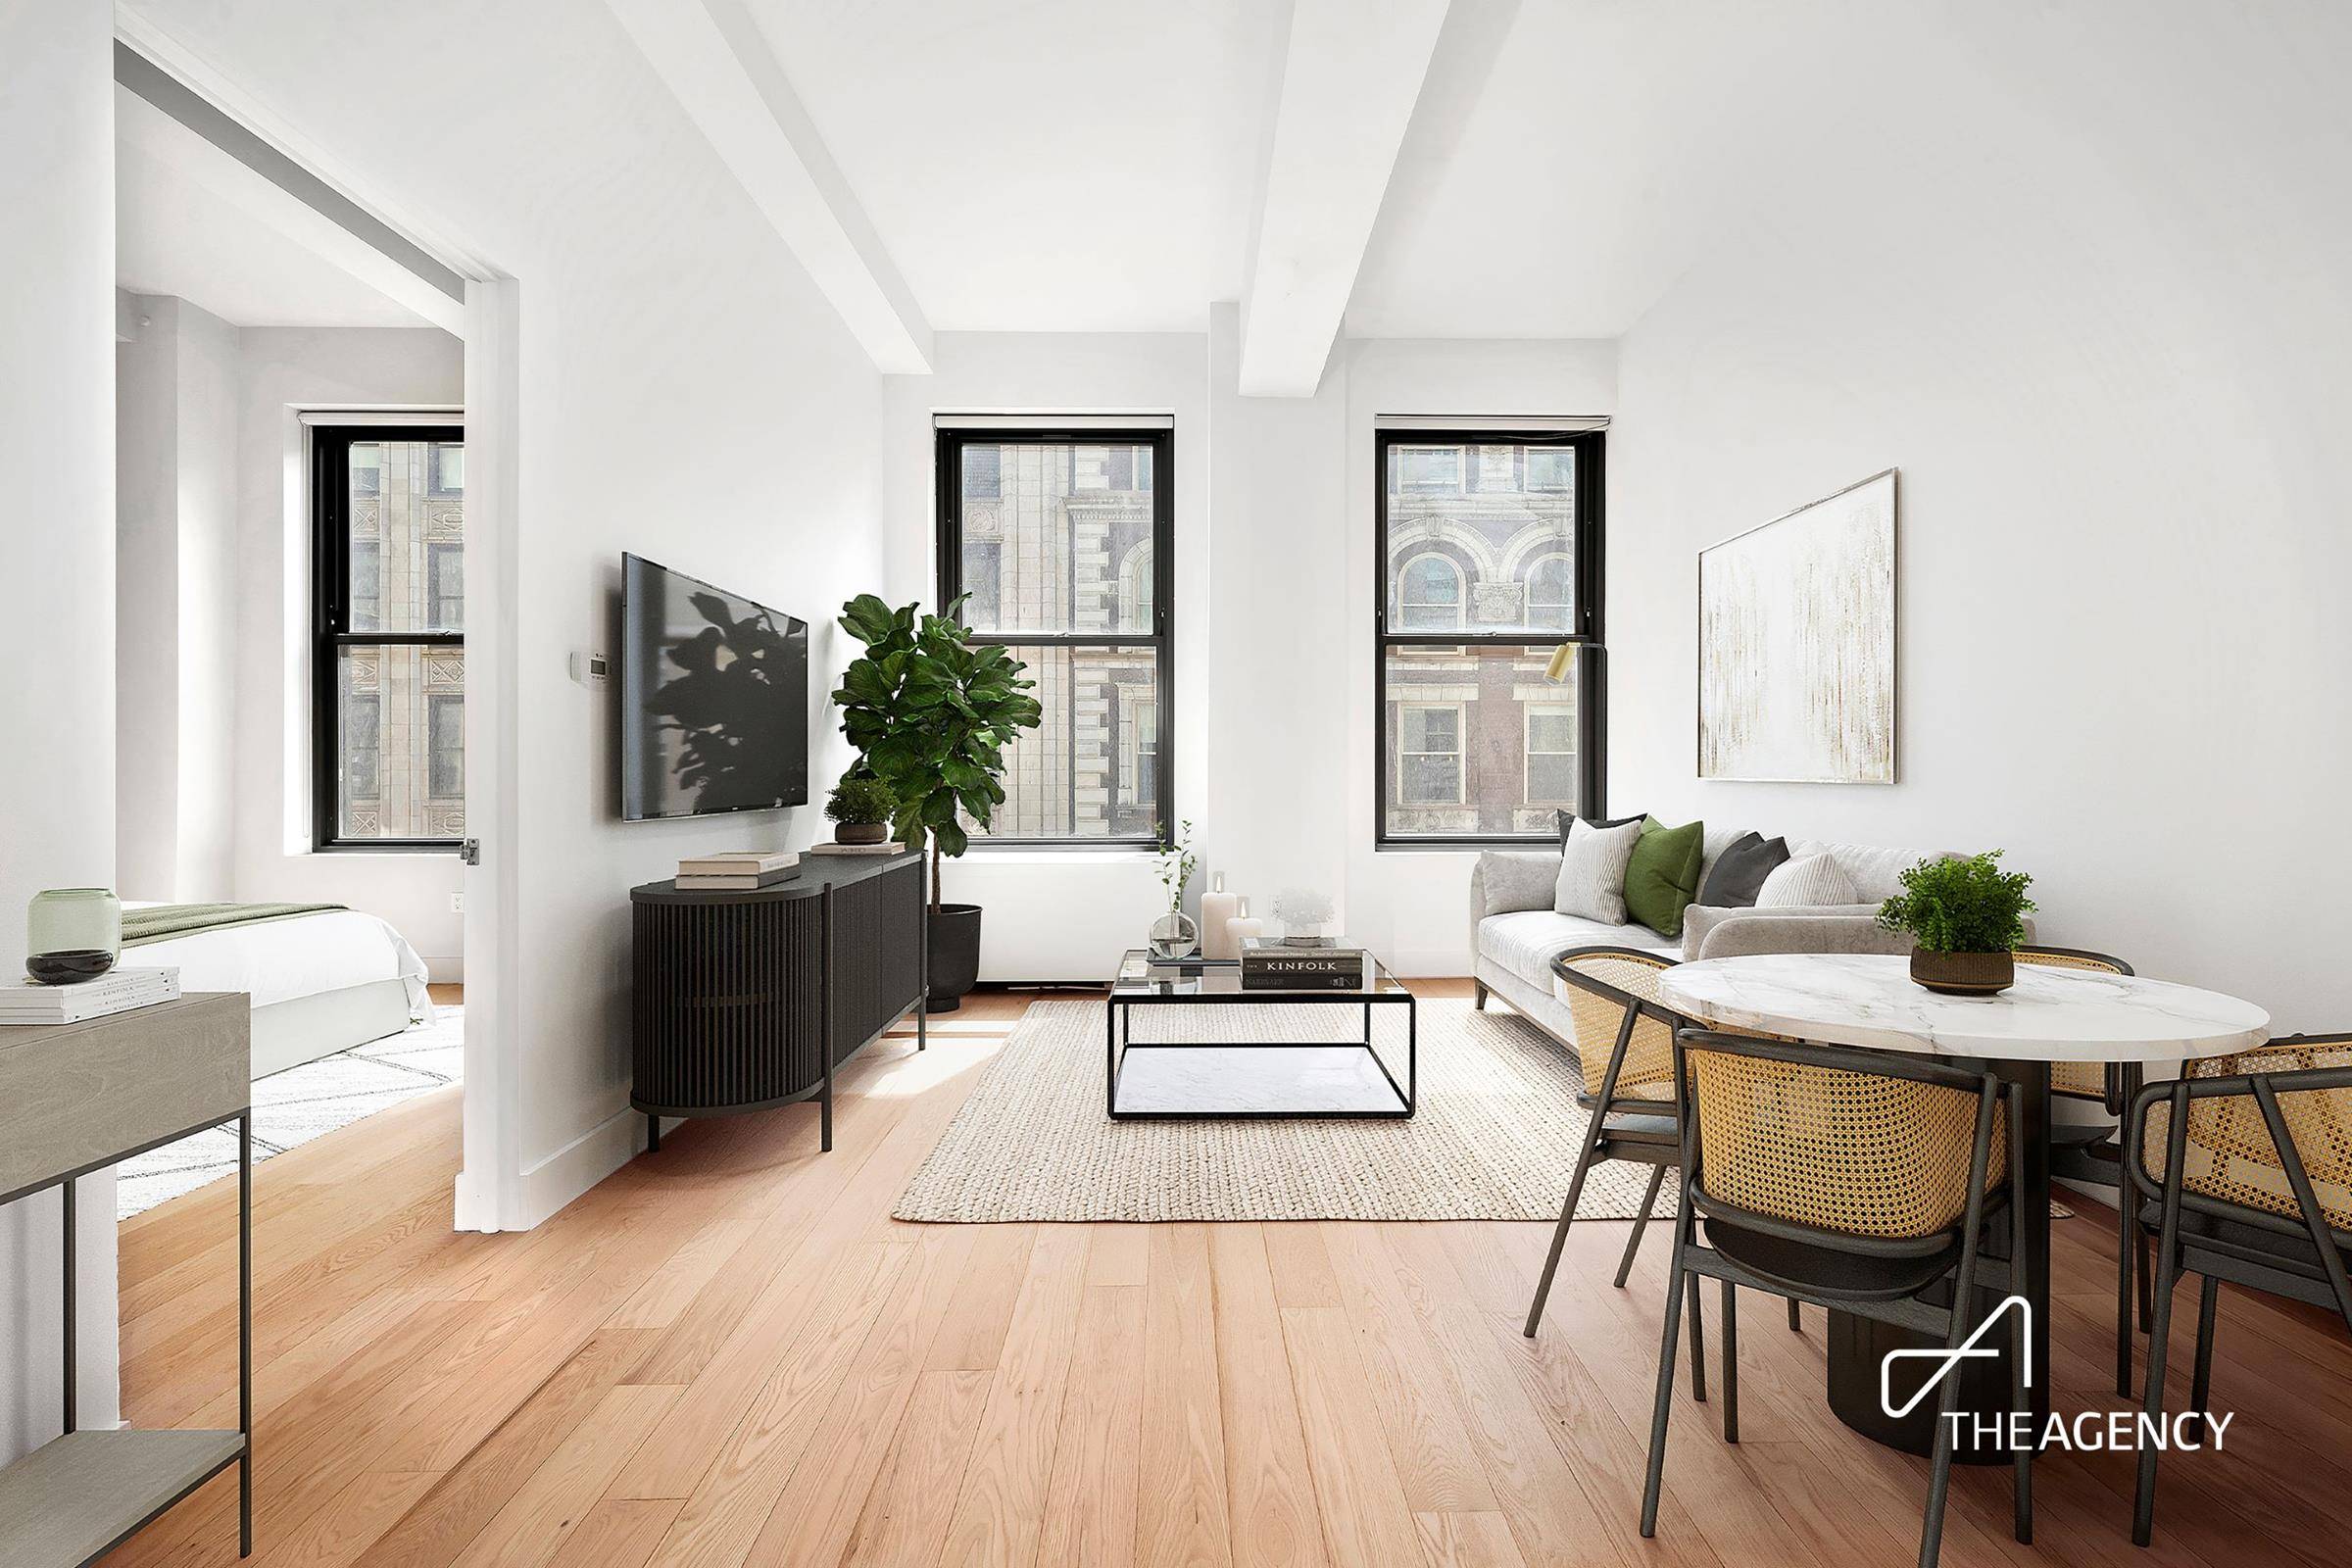 Ripped from the pages of a magazine, this remarkable one bedroom loft is the rare unit that can boast 14 ceilings, an interior made of organic materials like stone and ...